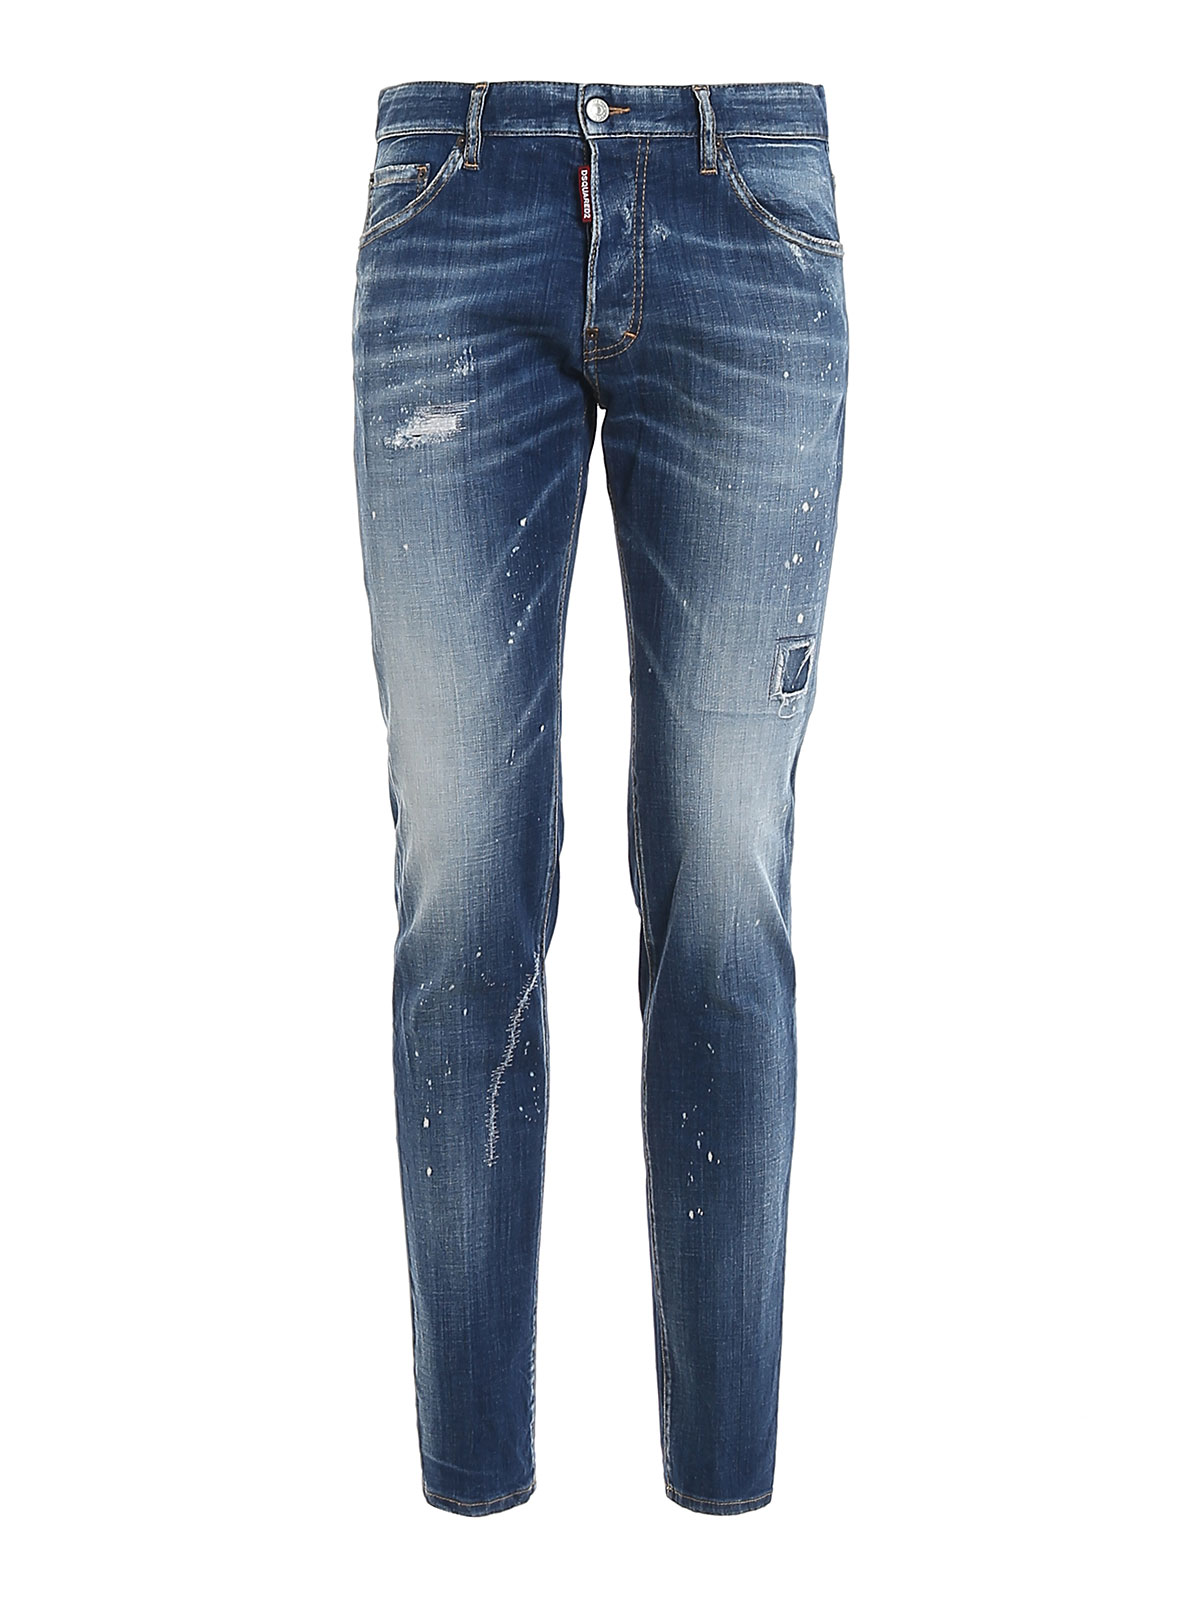 Dsquared2 Cool Guy Jeans In Medium Wash